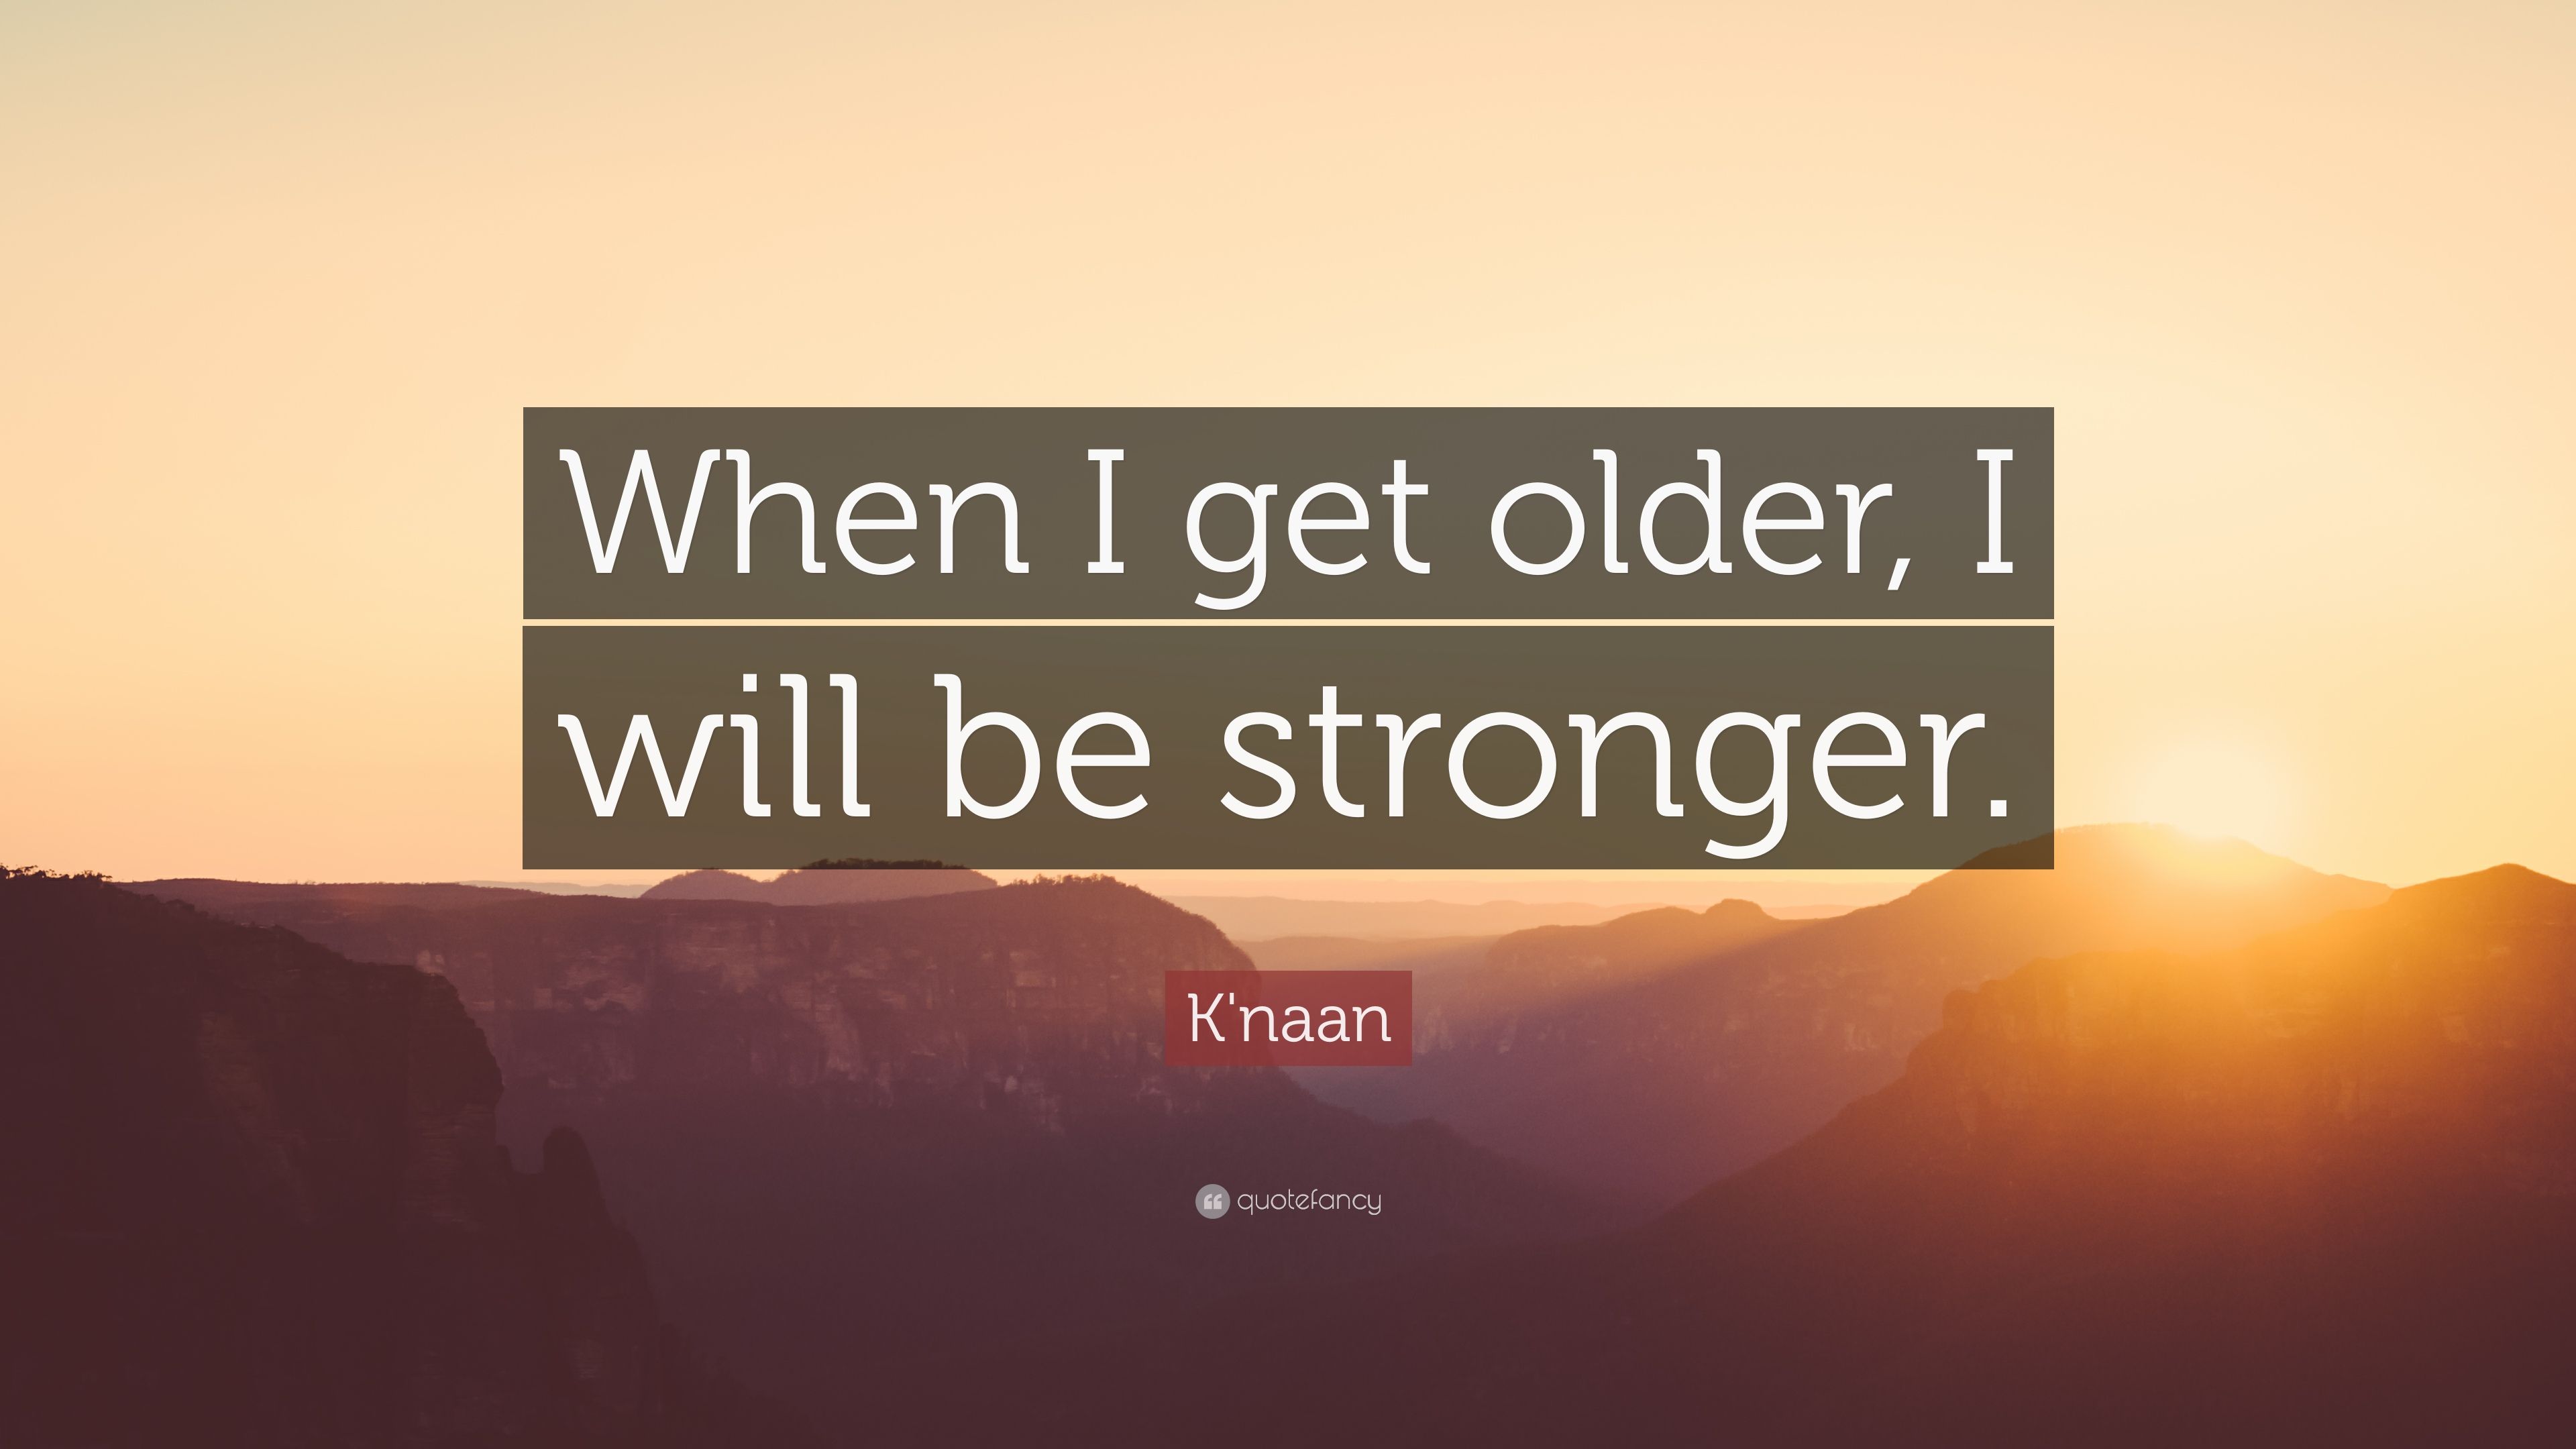 K'naan Quote: “When I get older, I will be stronger.” 9